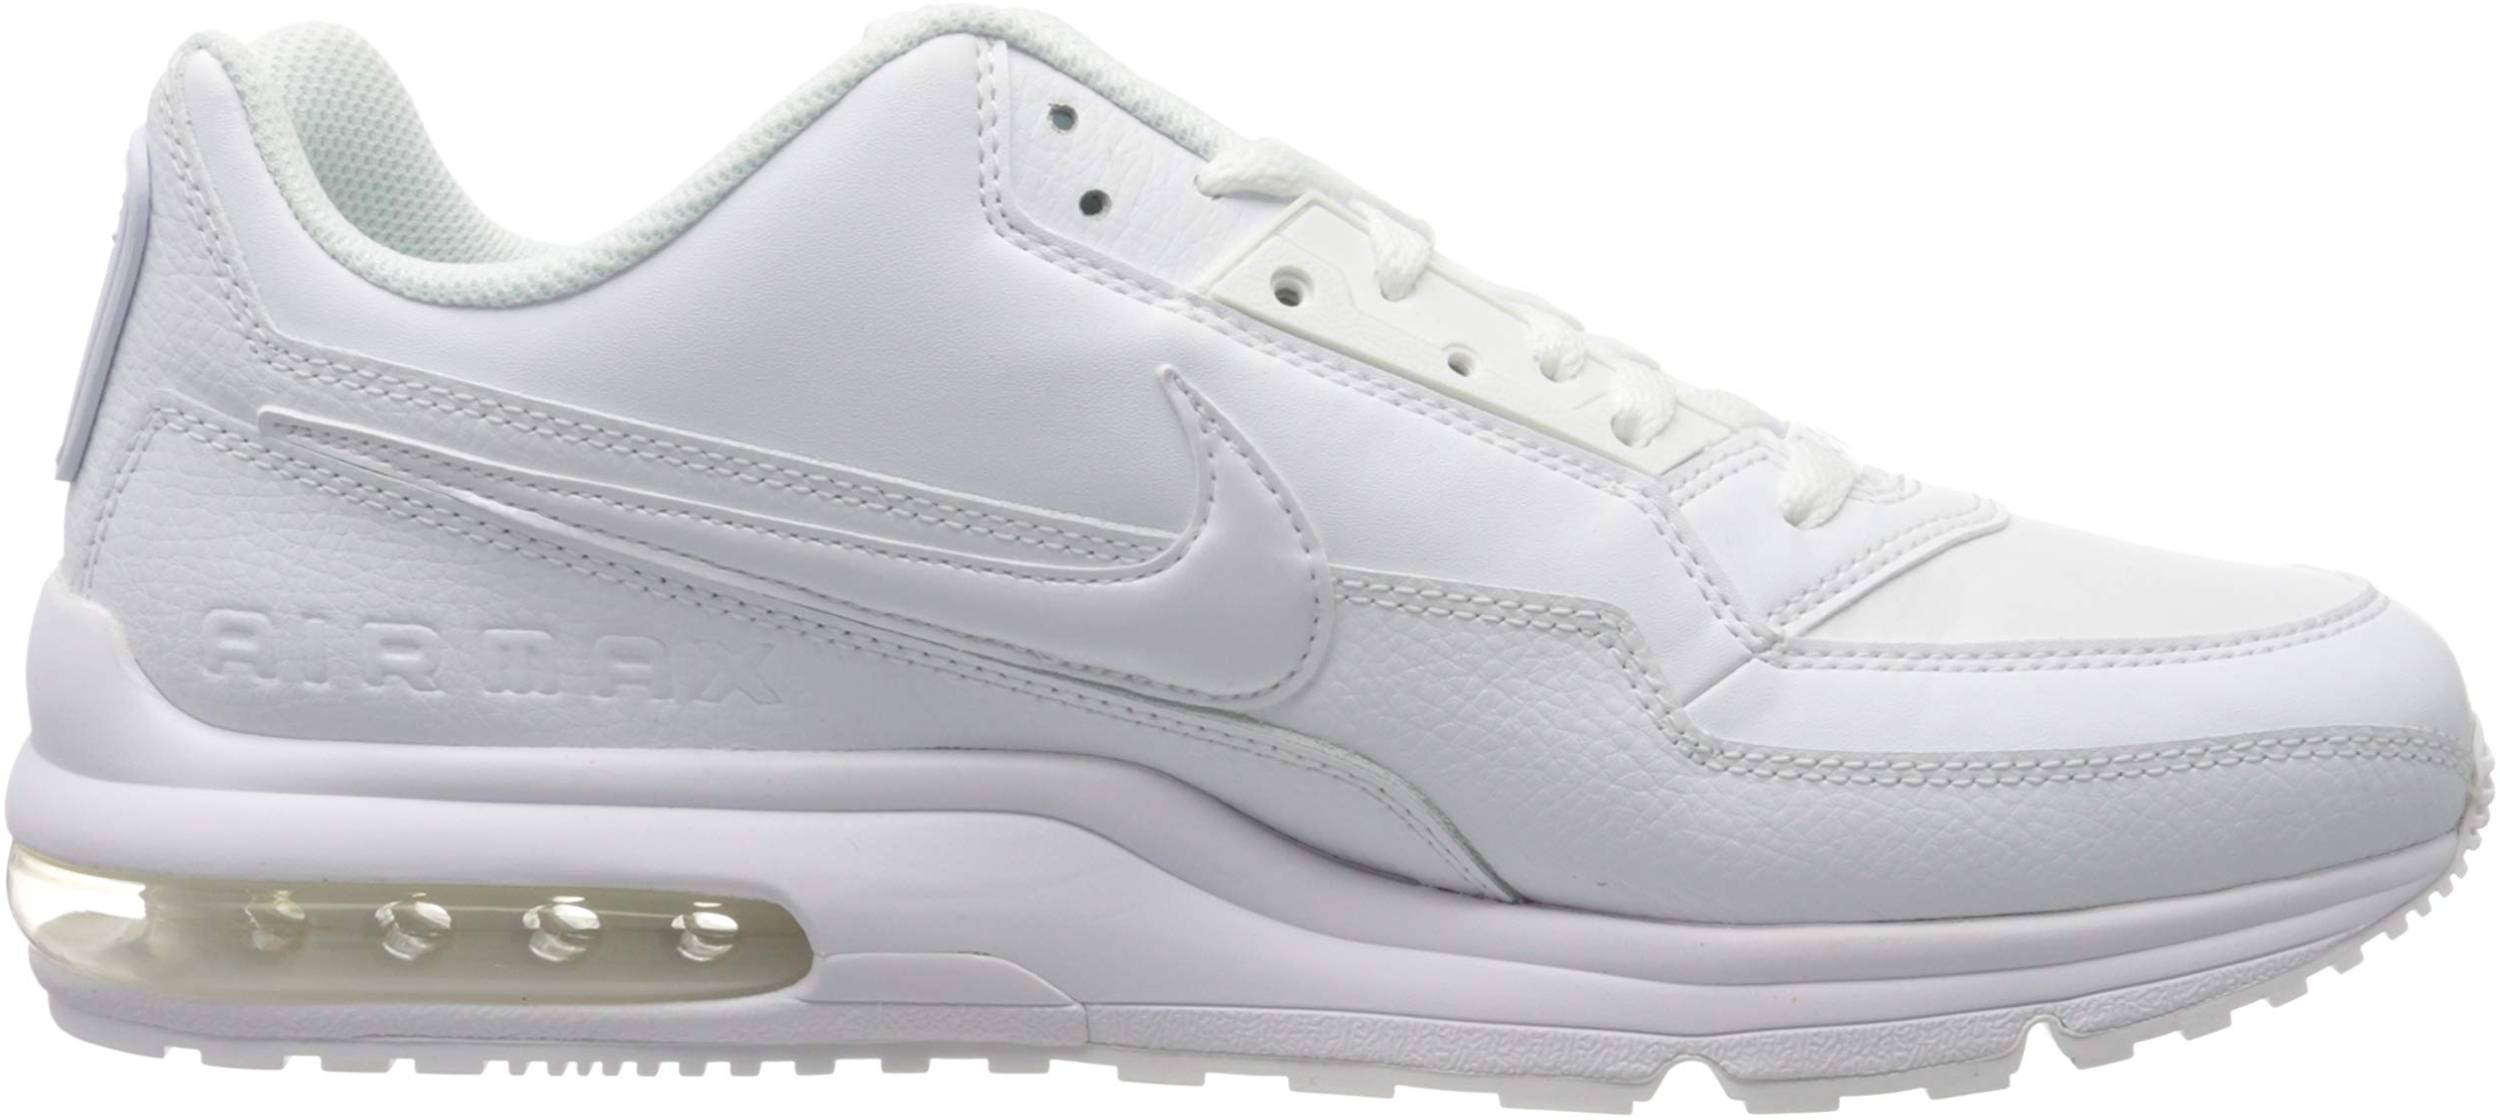 Nike Max LTD 3 sneakers in 7 (only $105) |